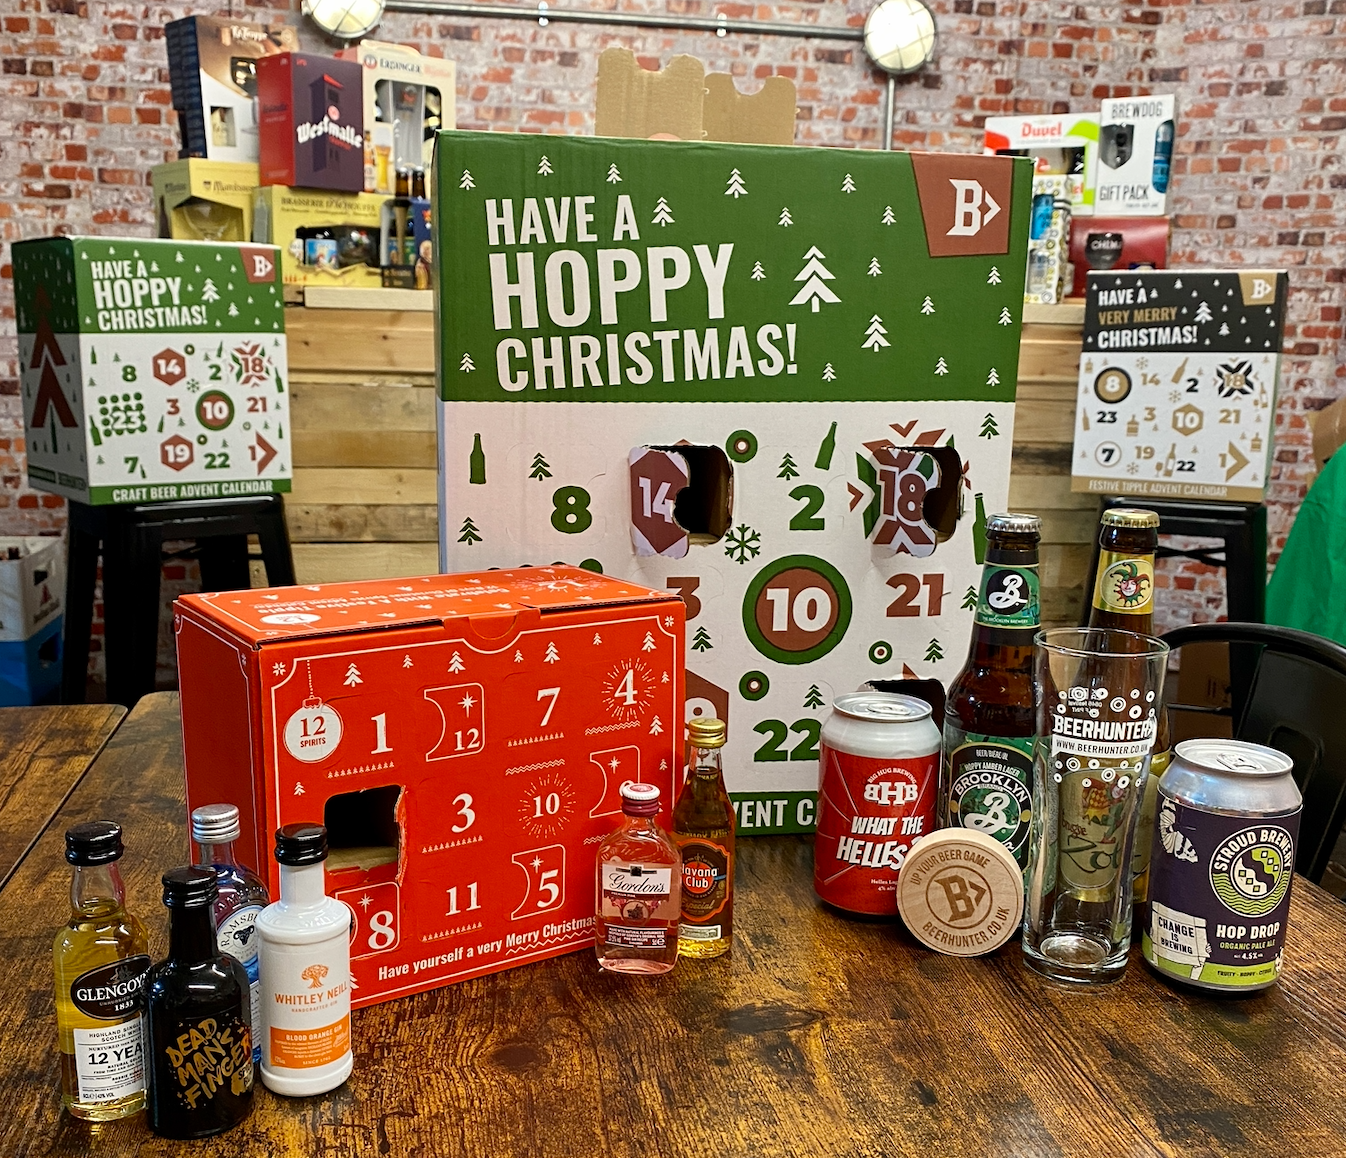 Manchester-based drinks brand Beerhunter launches Christmas gift range, The Manc